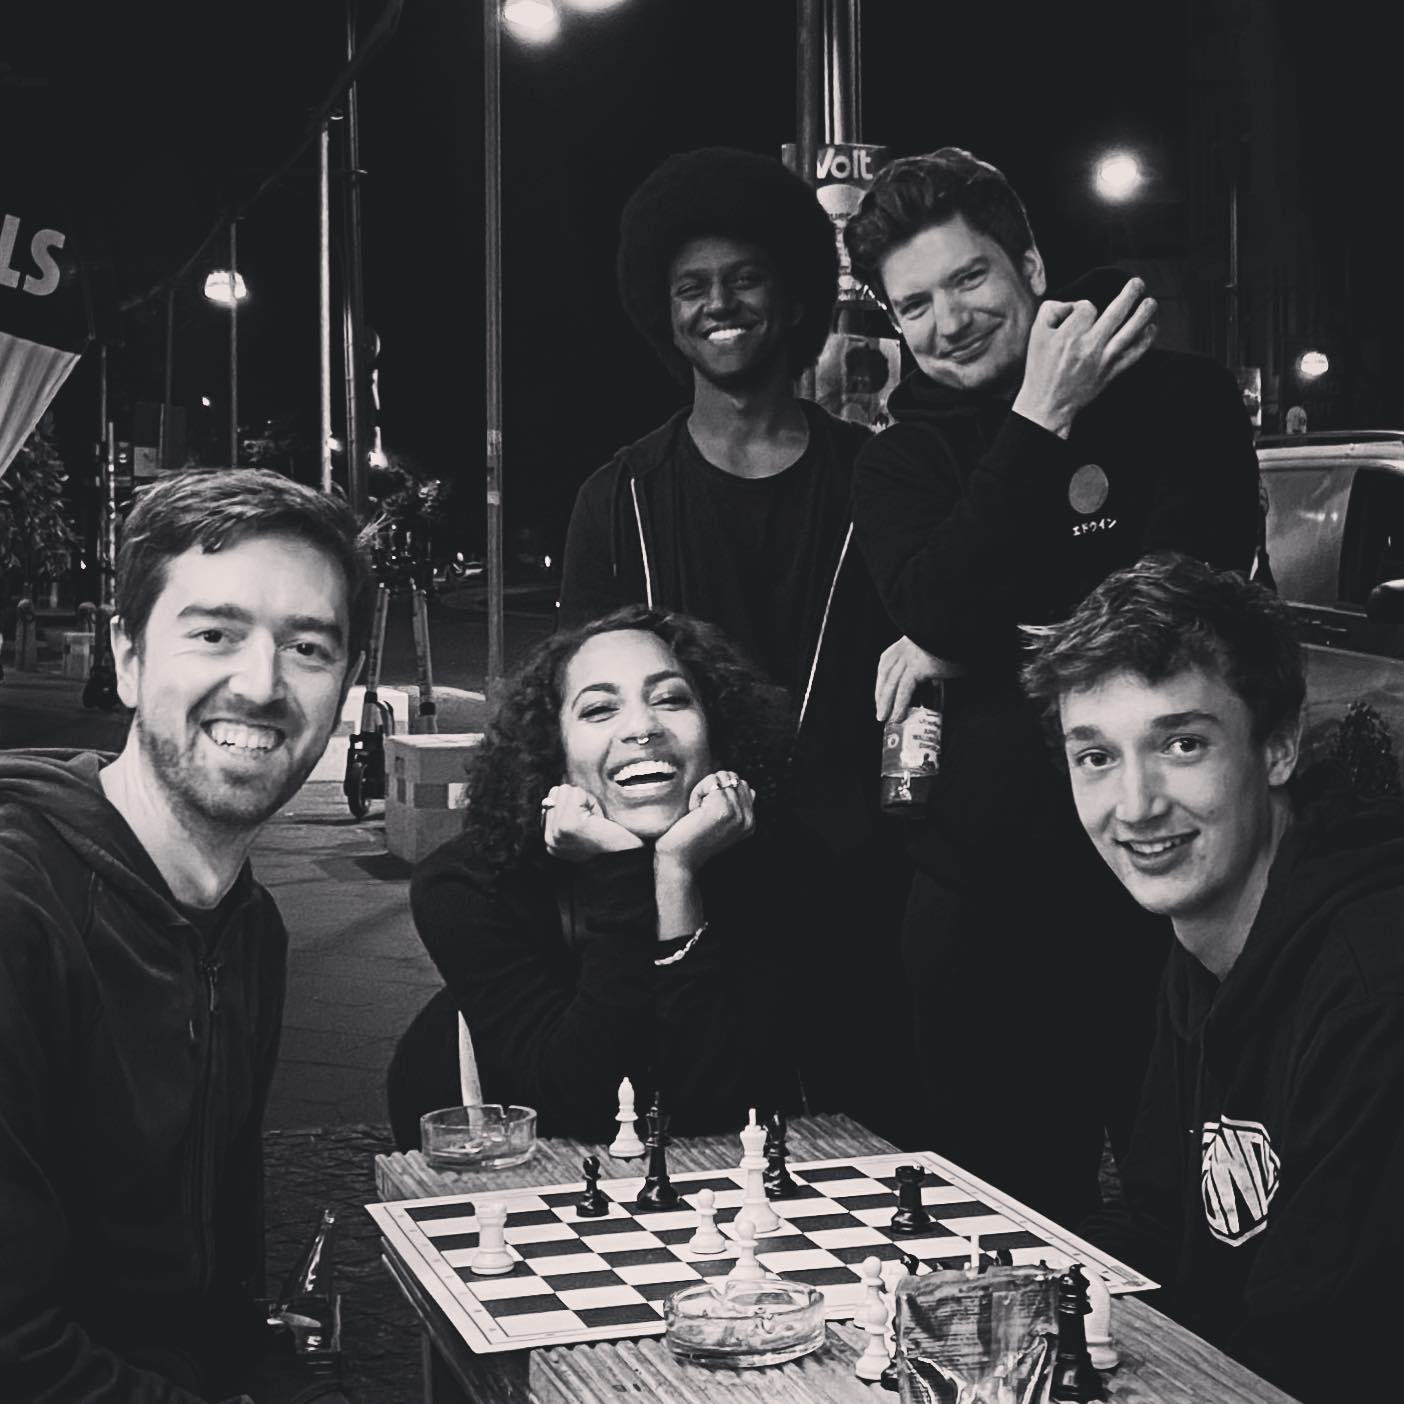 A group of chess players posing for a photo all smiling